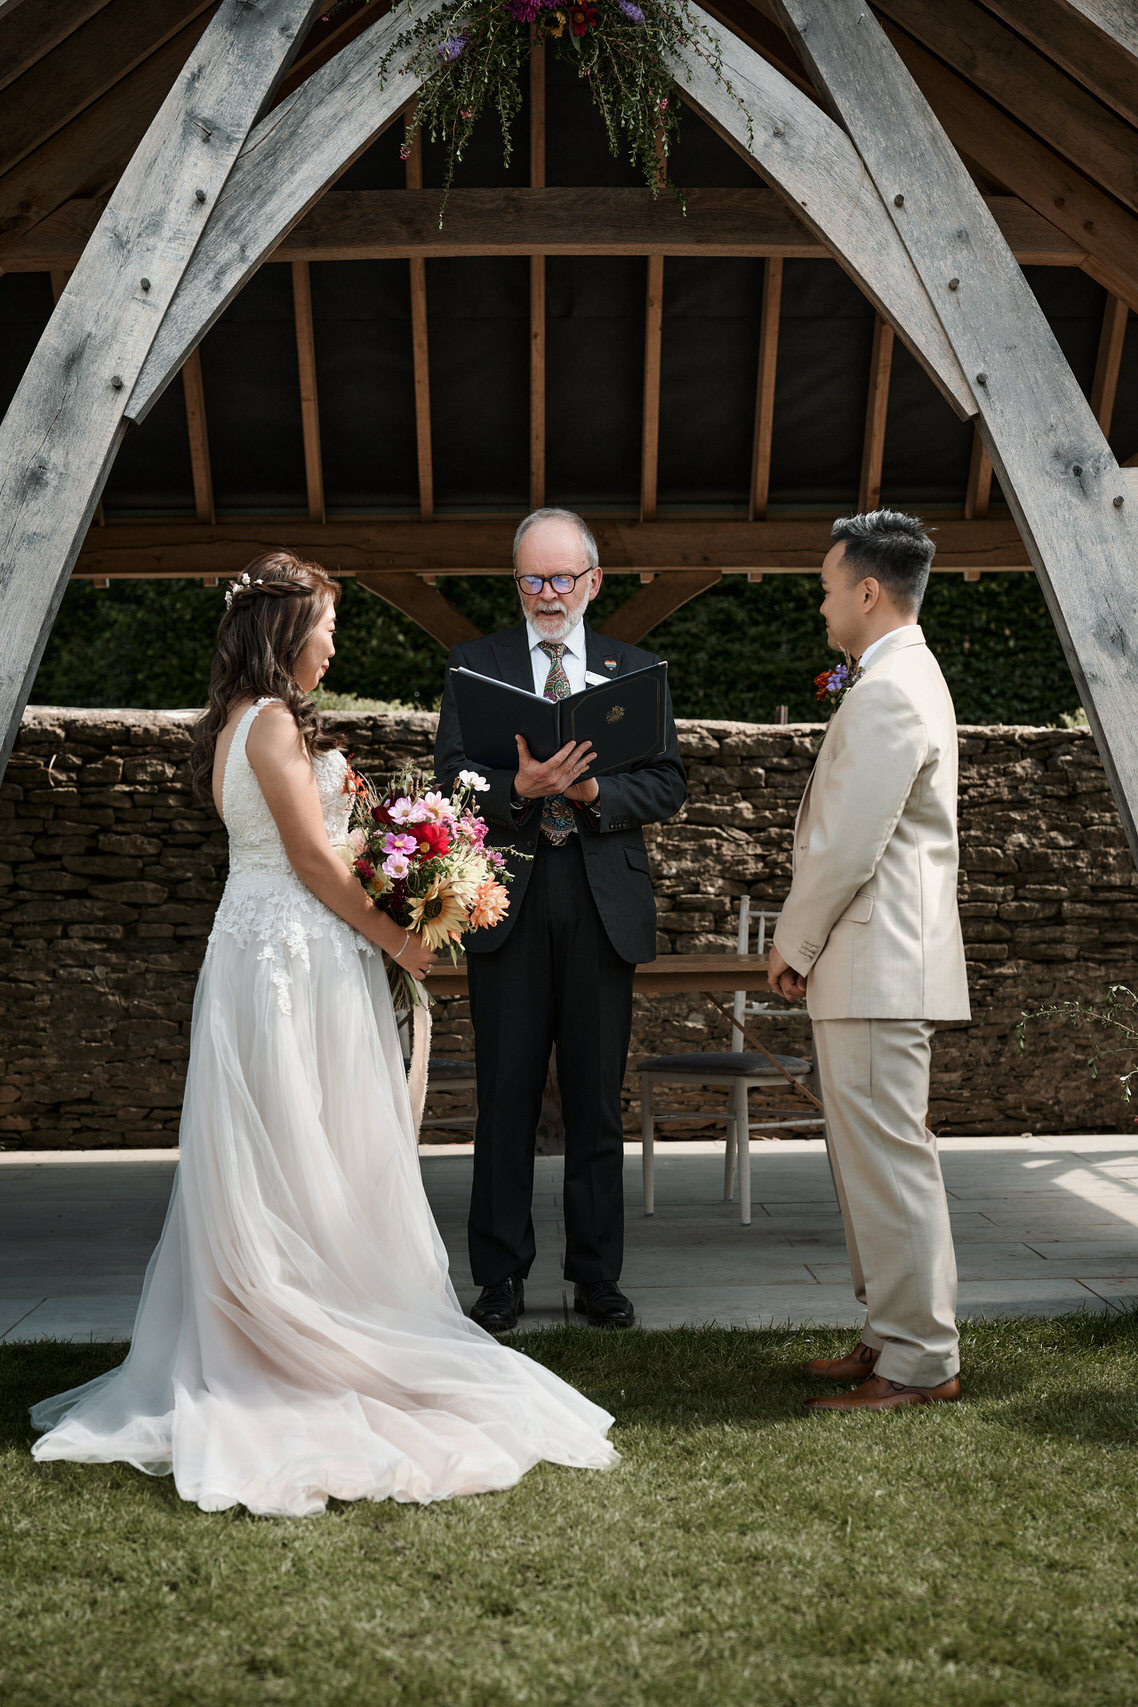 A man and a woman getting married make promises to each other near a wooden outdoor structure.